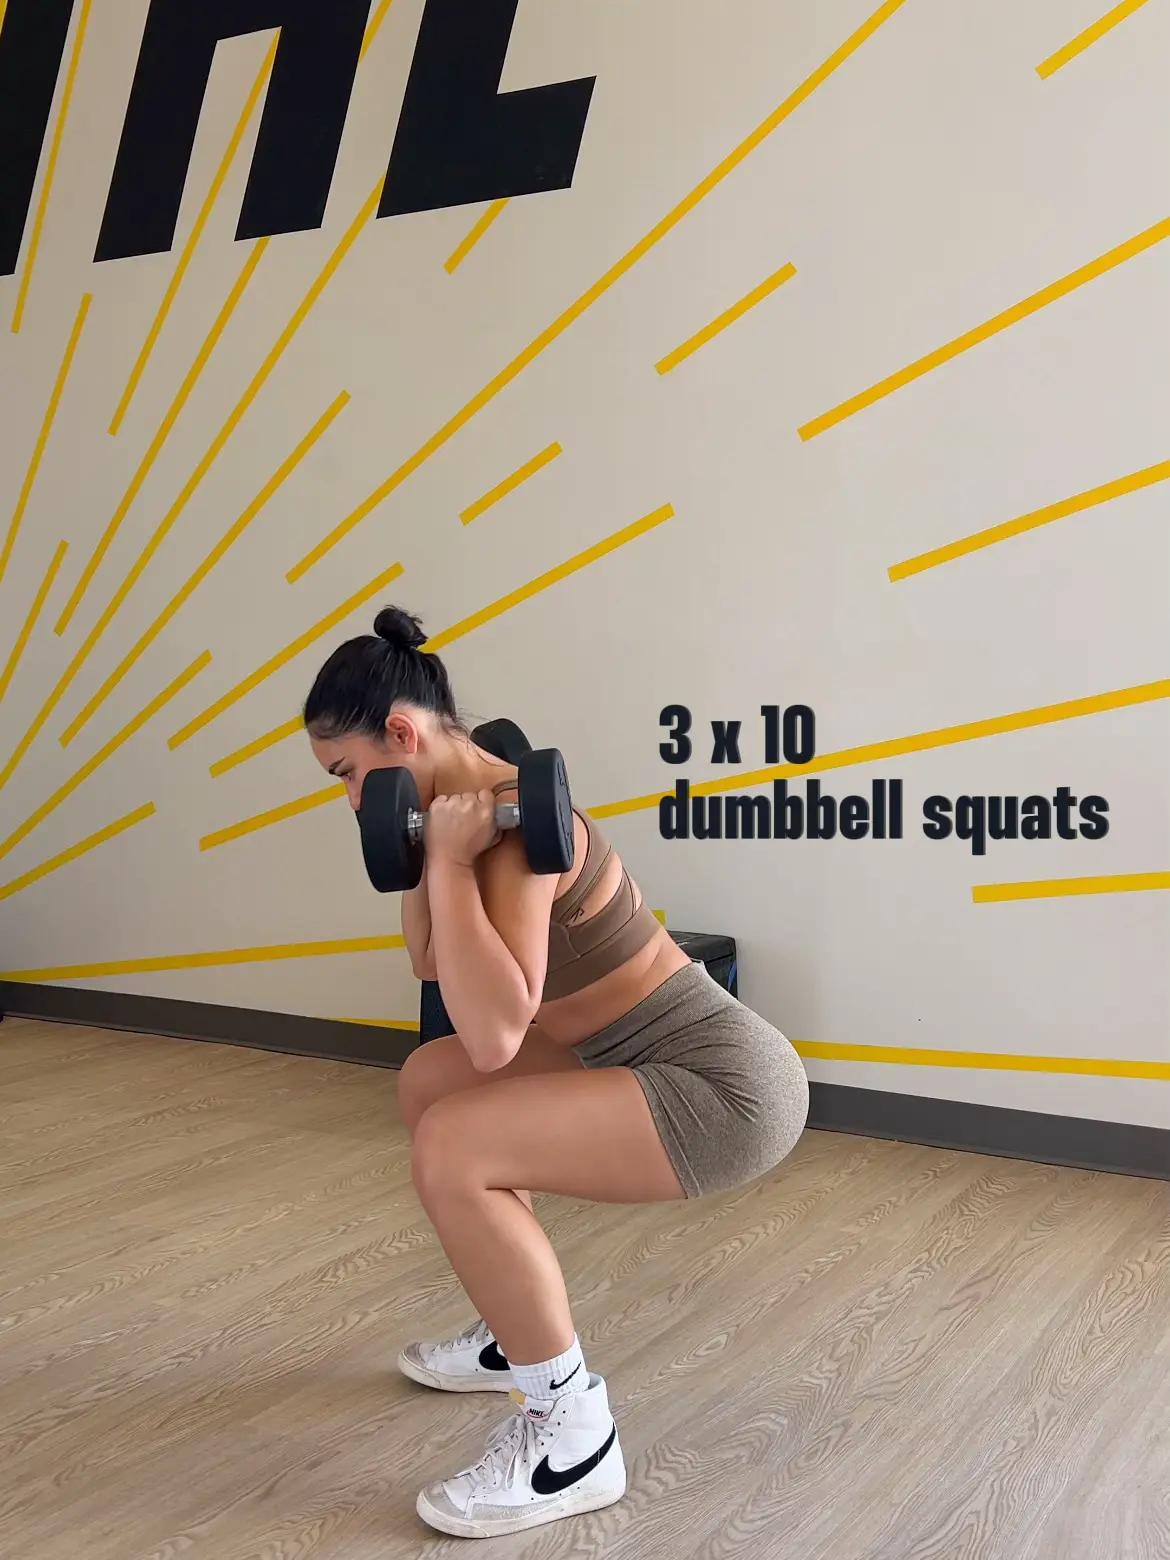 glutes will thank you later🤌🏼✨@AYBL - Workout deets - • Squats 3x10